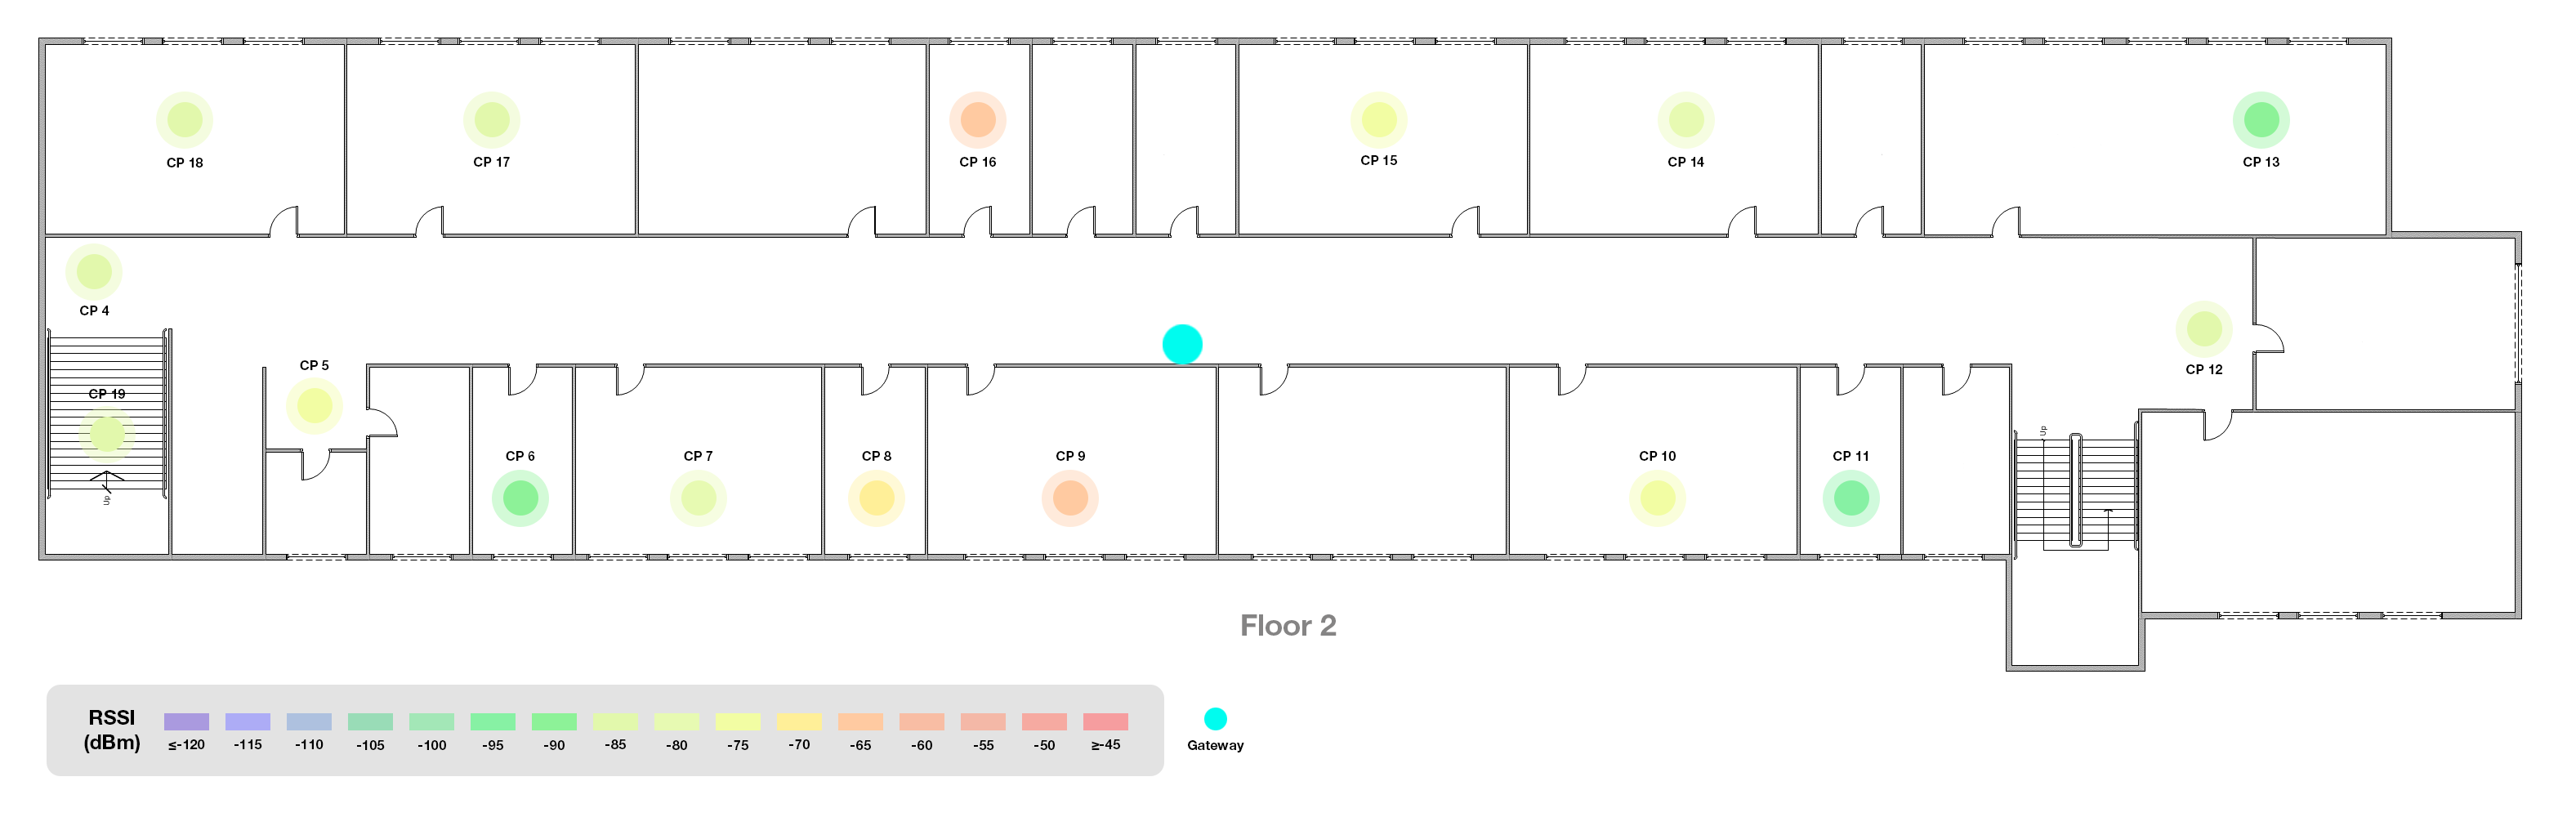  A LoRaWAN Experiment on Signal Mapping in a Building